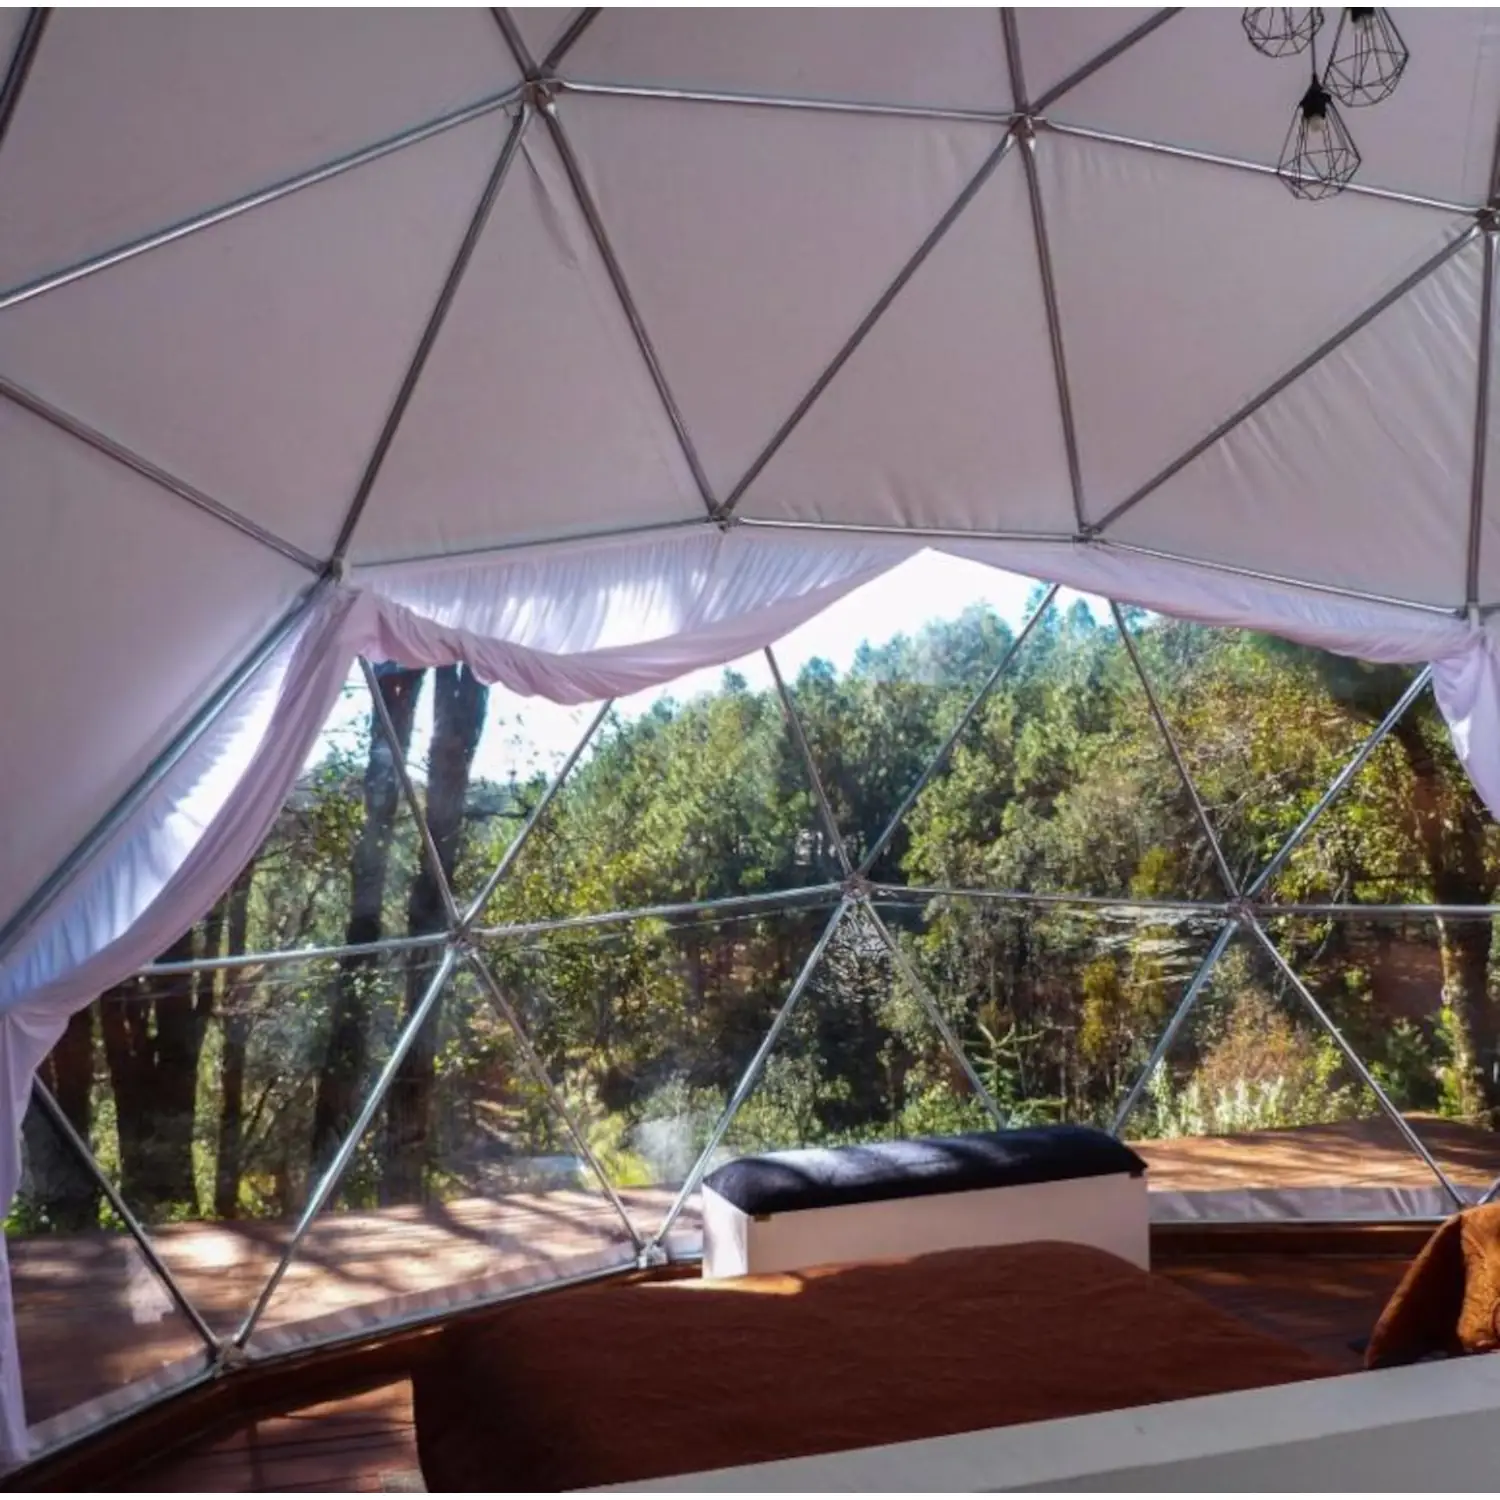 6m-glamping-dome-in-budget (9)